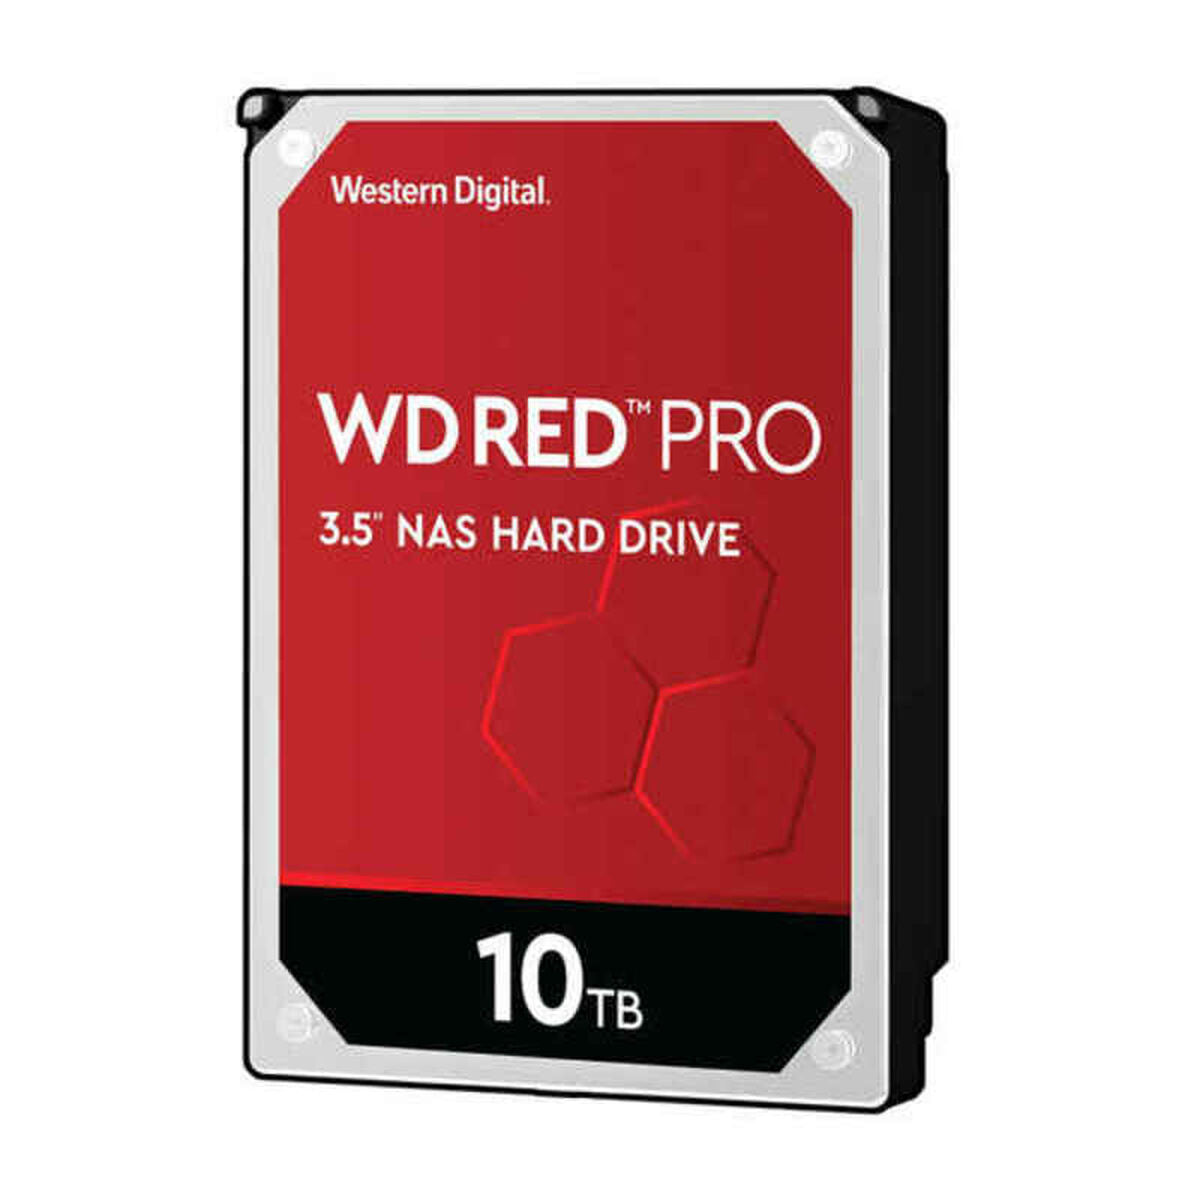 Hard Drive Western Digital SATA RED PRO, Western Digital, Computing, Data storage, hard-drive-western-digital-sata-red-pro, :10 TB, :12 TB, Brand_Western Digital, Capacity_10 TB, Capacity_12 TB, category-reference-2609, category-reference-2803, category-reference-2806, category-reference-t-19685, category-reference-t-19909, category-reference-t-21357, computers / components, Condition_NEW, Price_400 - 500, Teleworking, RiotNook